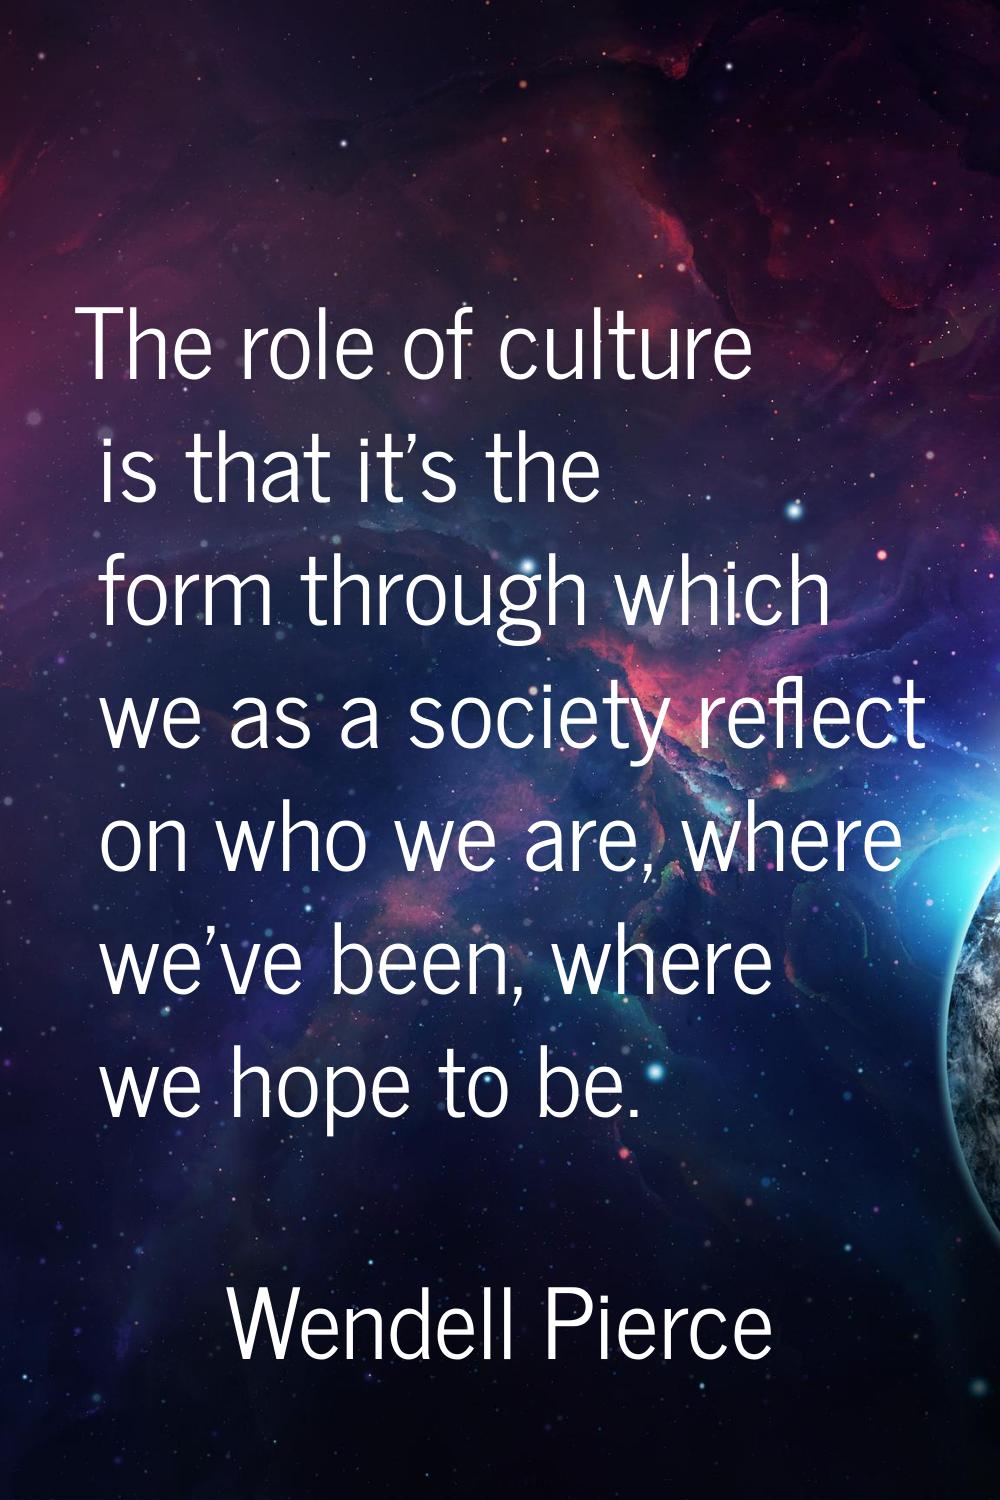 The role of culture is that it's the form through which we as a society reflect on who we are, wher